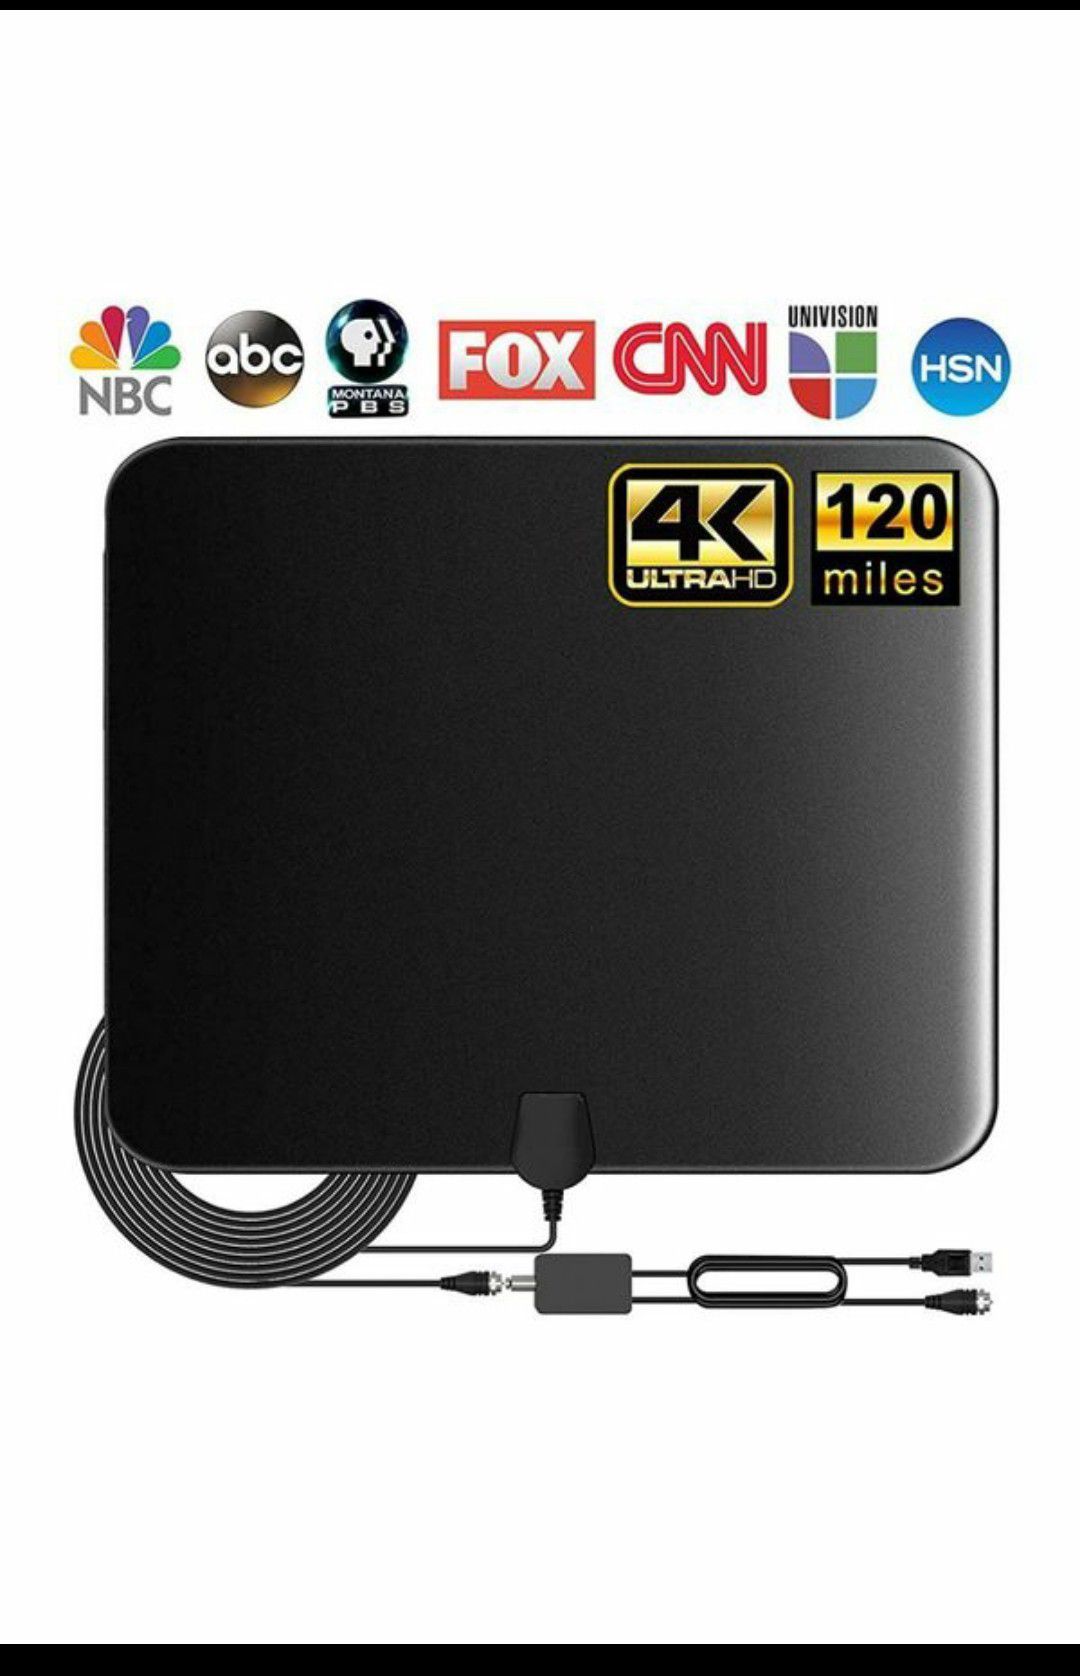 (W223) TV Antenna, Indoor Amplified Digital HDTV Antenna, 80-120 Miles Range Signal Booster for 4K 1080p Fire TV Stick Local Channels and All TV's